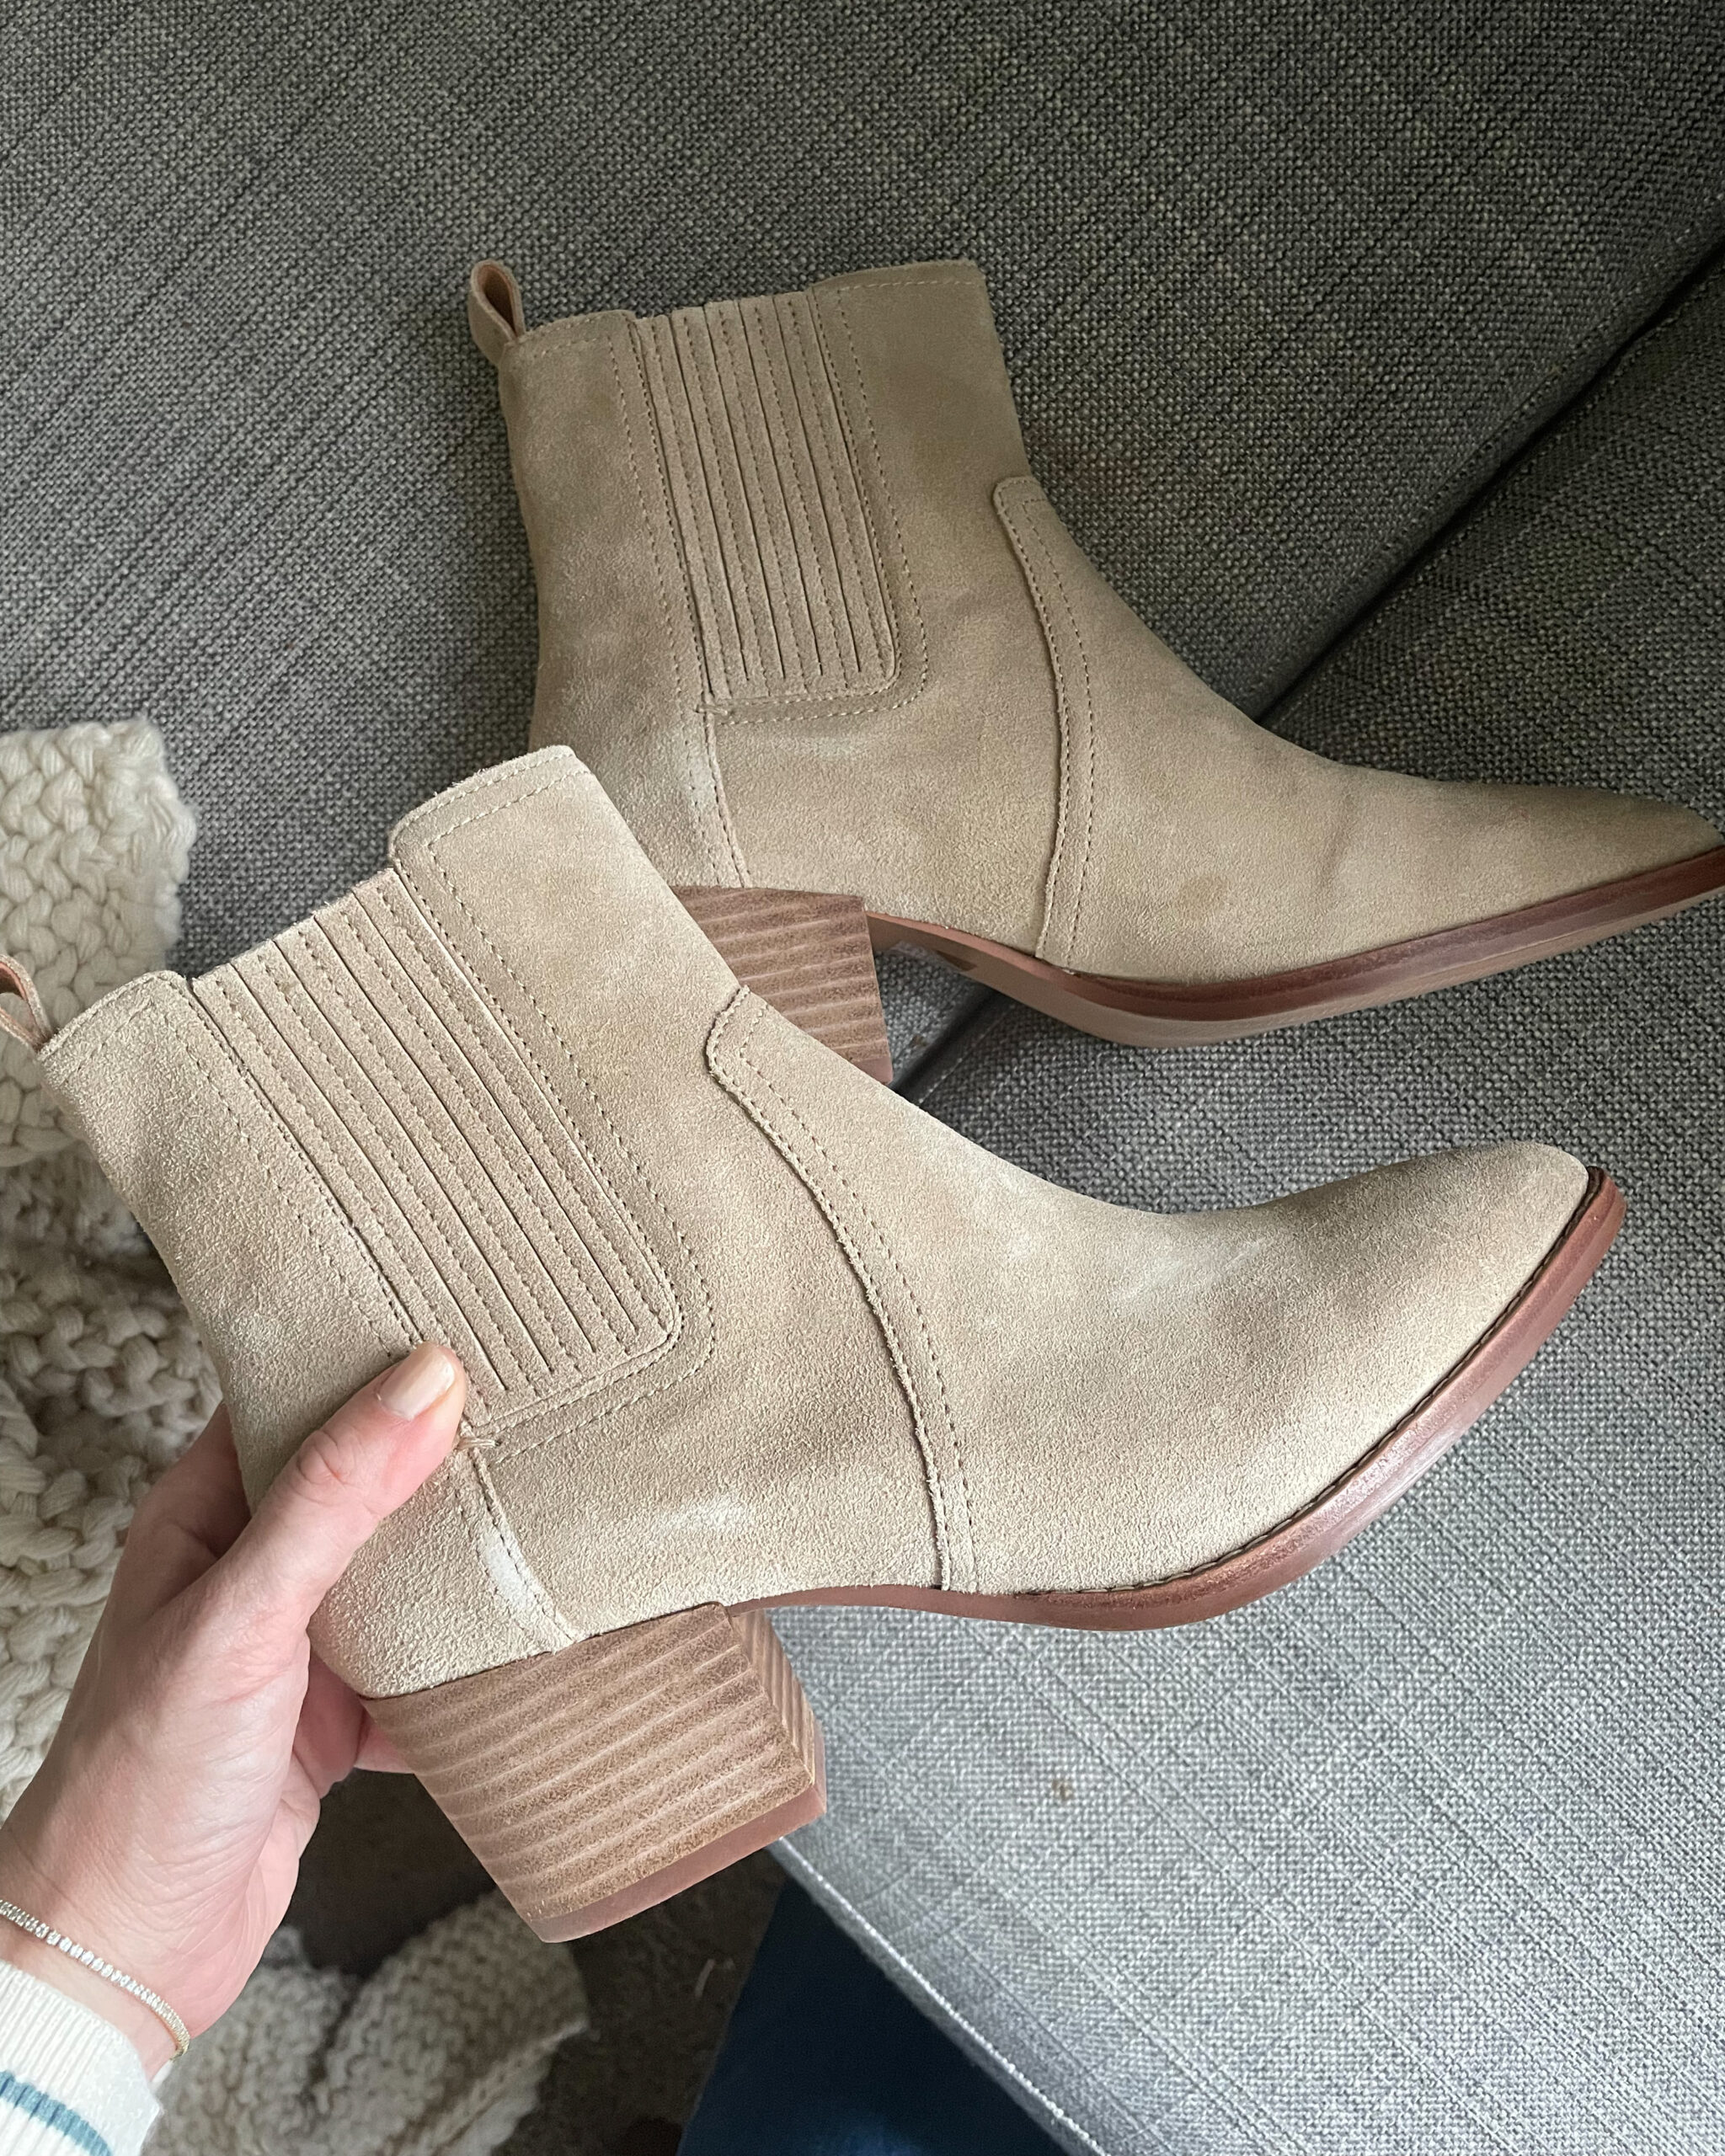 Suede booties from Madewell